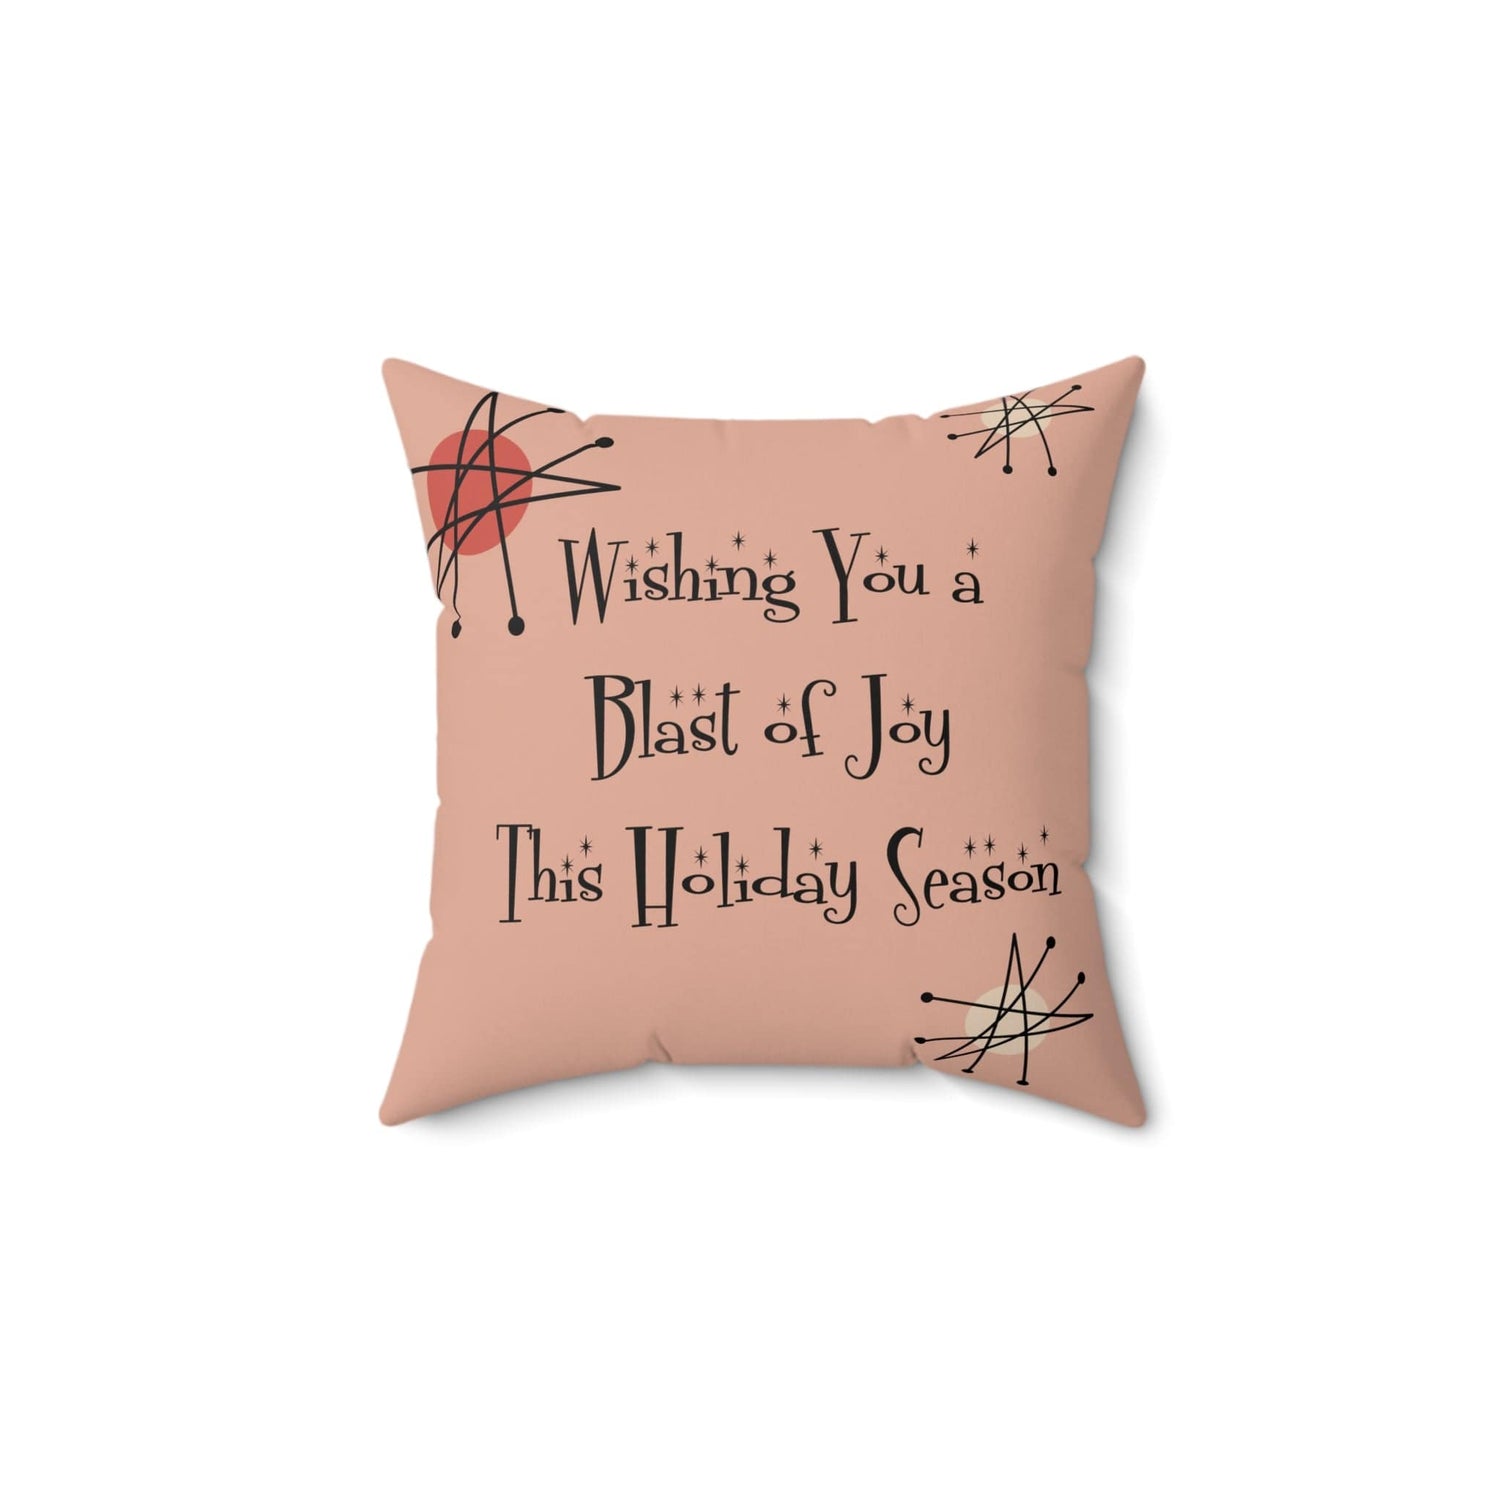 Mid Century Modern Christmas Pillow Gift, Wishing You A Blast Of Joy This Holiday Season, Atomic Cat, Kitschy Style Pillow And Insert Home Decor